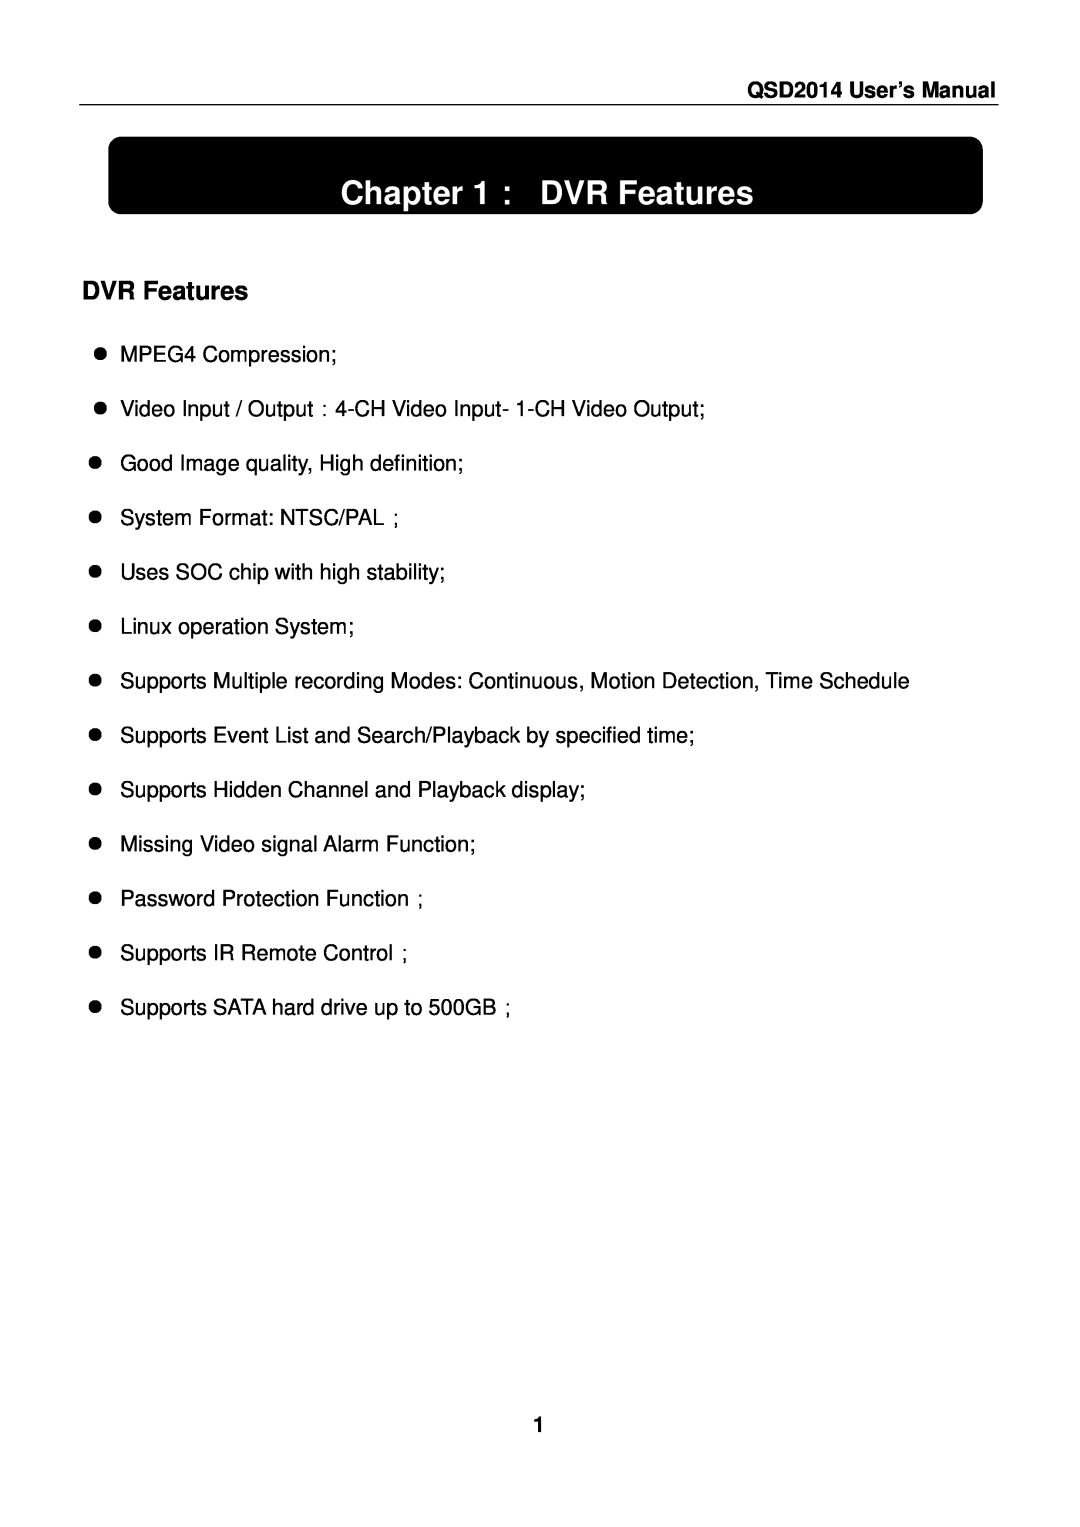 Q-See user manual ： DVR Features, QSD2014 User’s Manual 